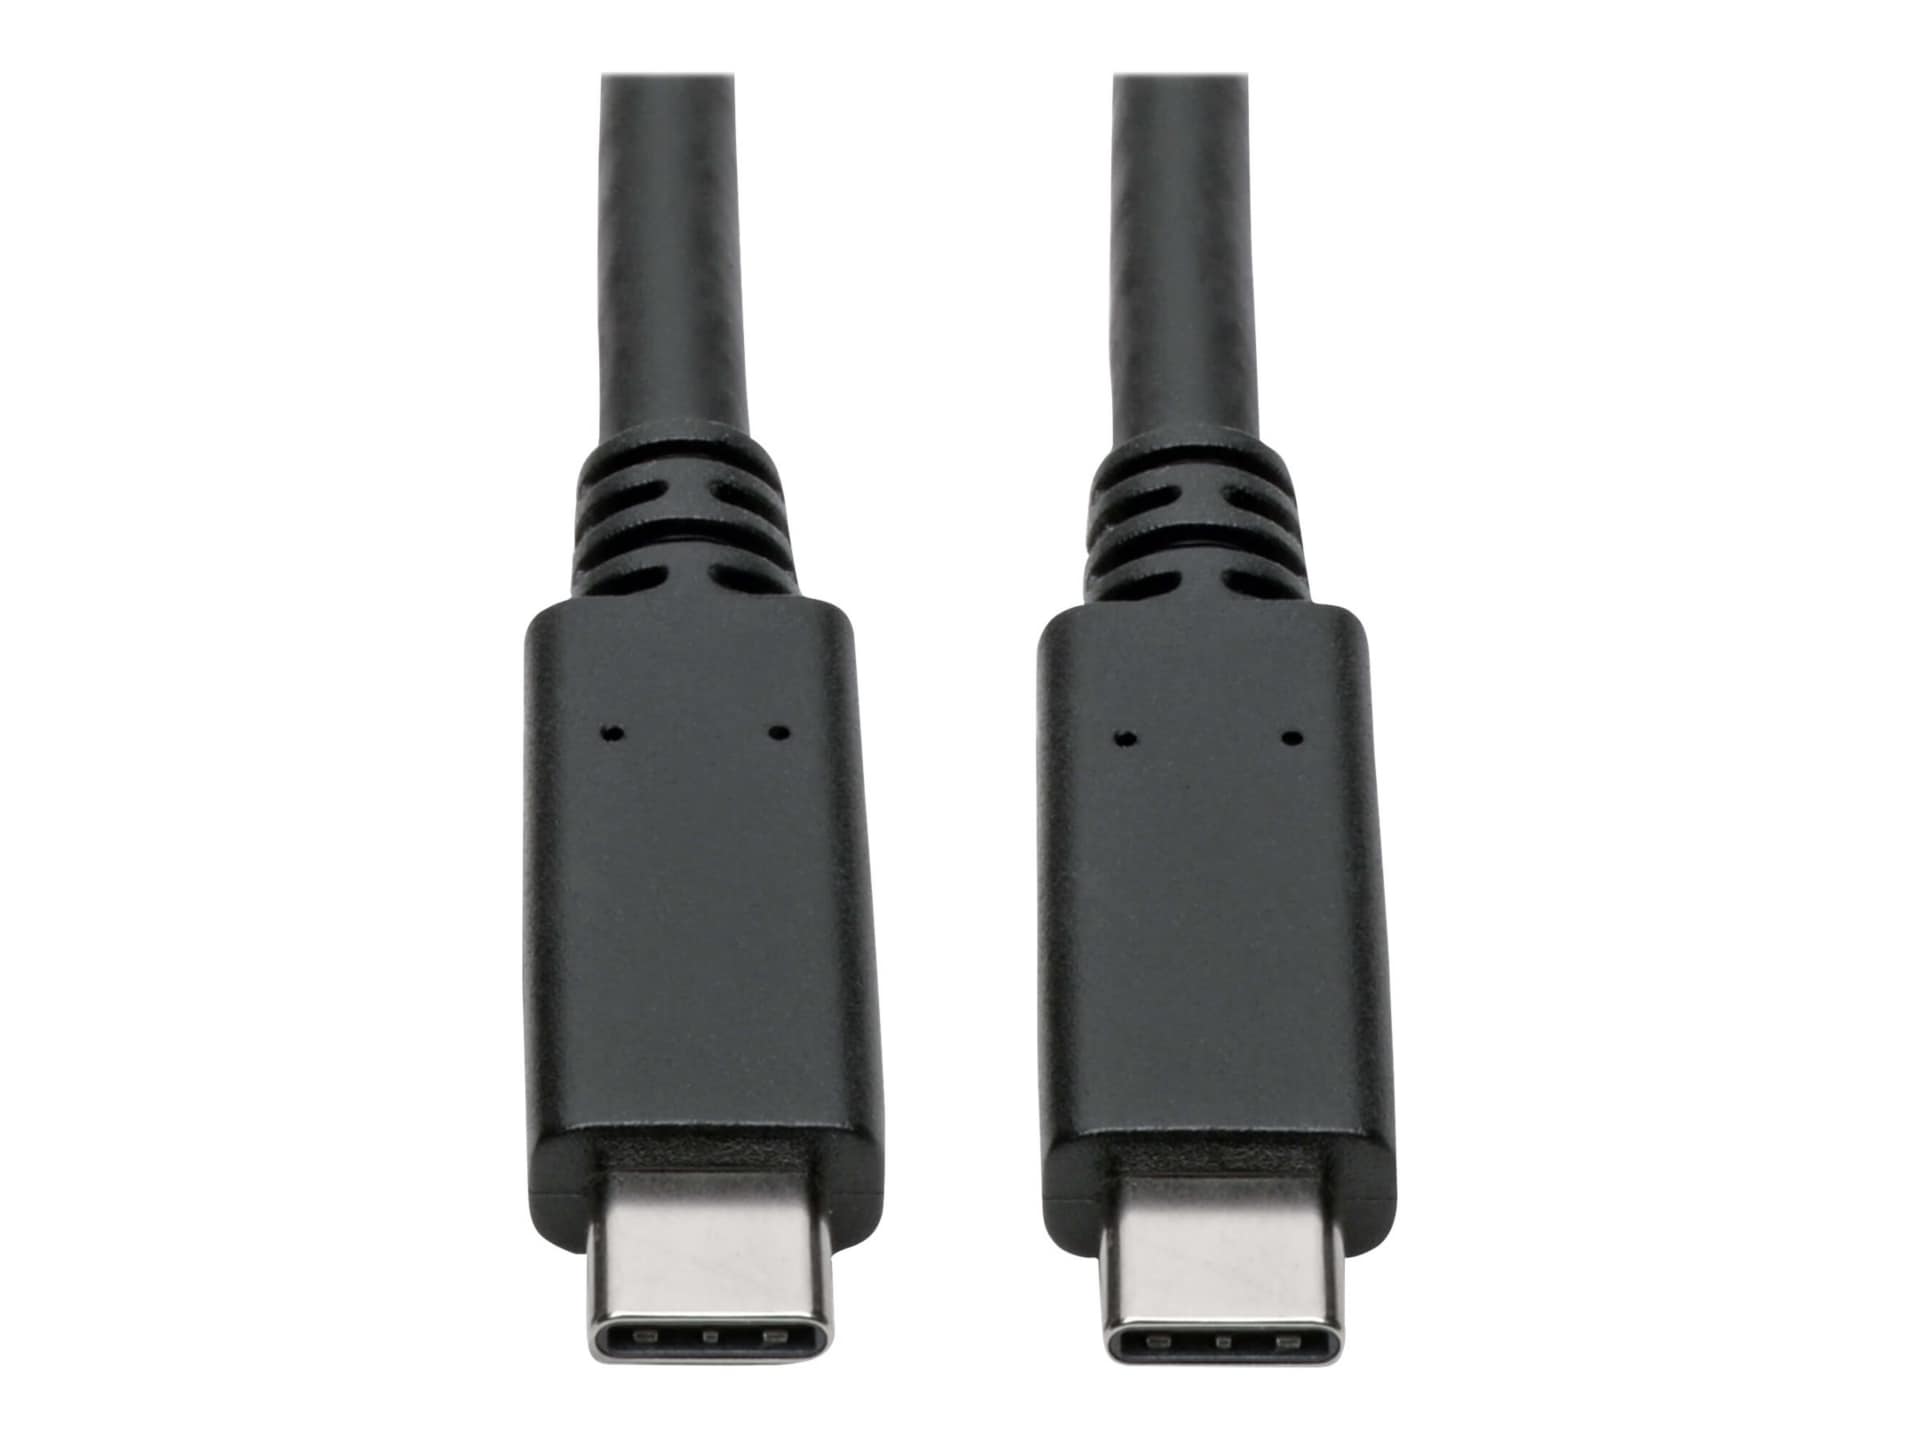 Eaton Tripp Lite Series USB-C Cable (M/M) - USB 3.2, Gen 2 (10 Gbps), 5A (100W) Rating, USB-IF Certified, Thunderbolt 3